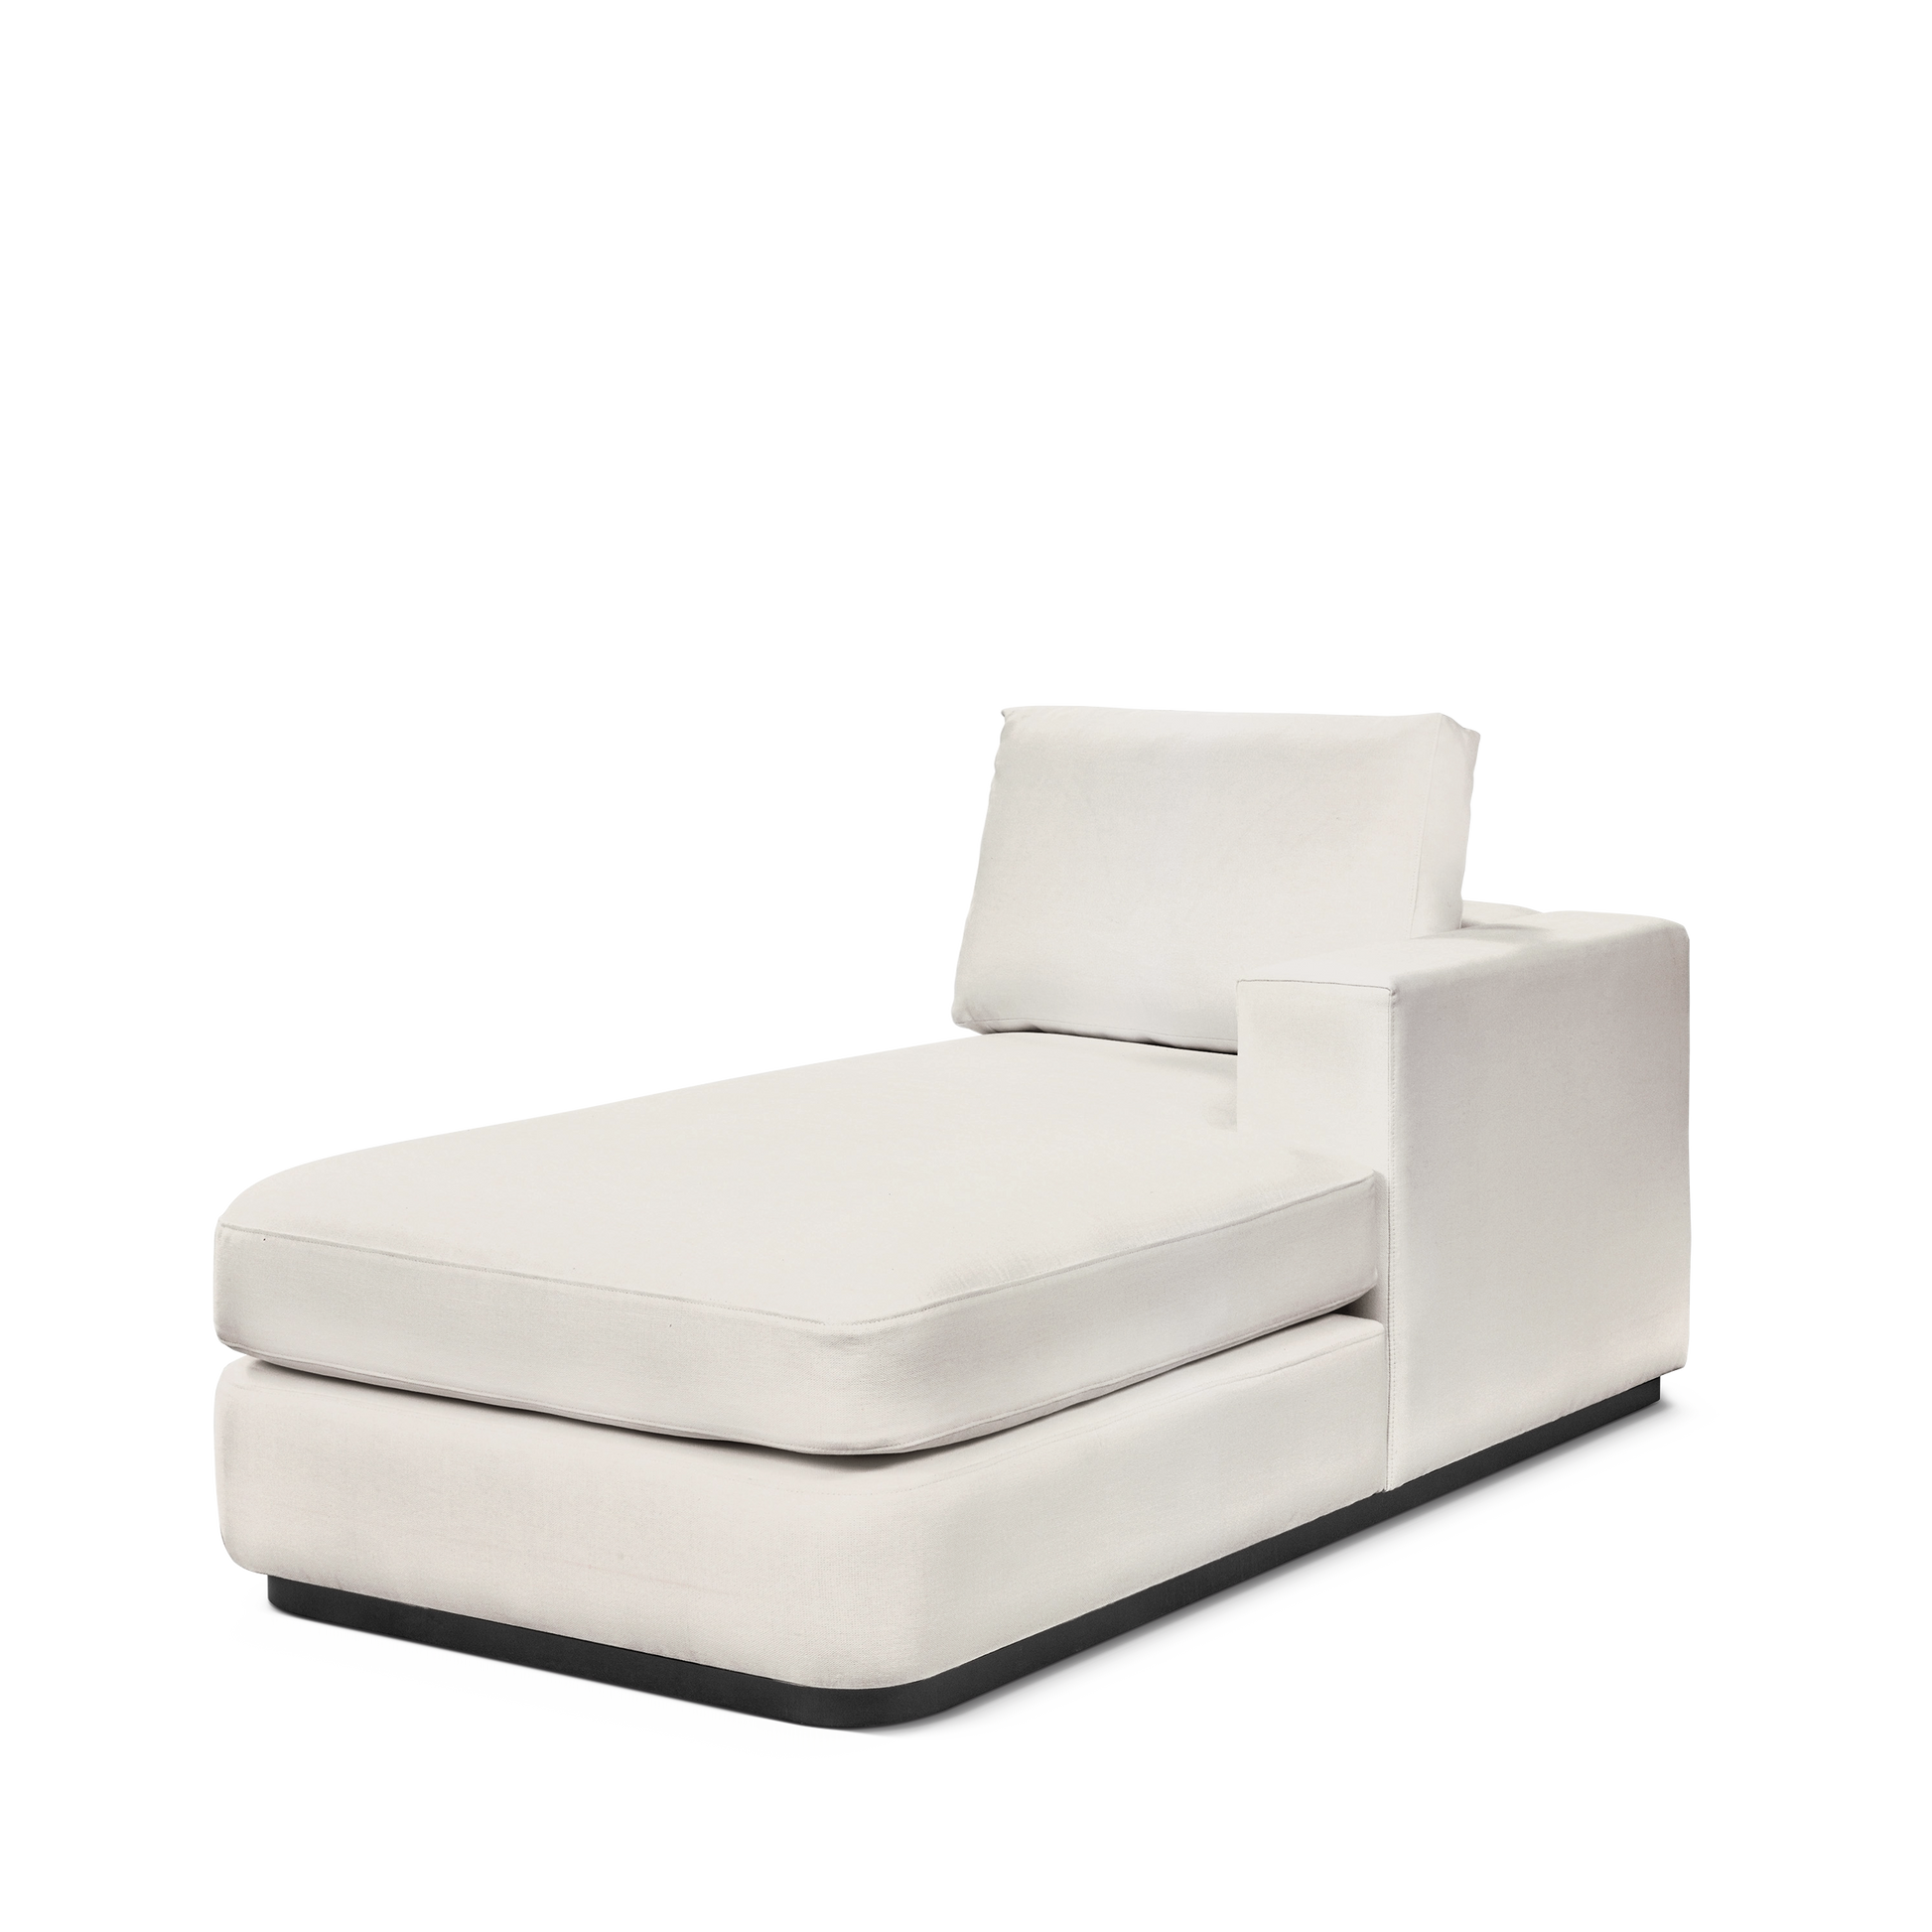 ATLAS 90 Lounge Bed arm rest right with bolt white textile 